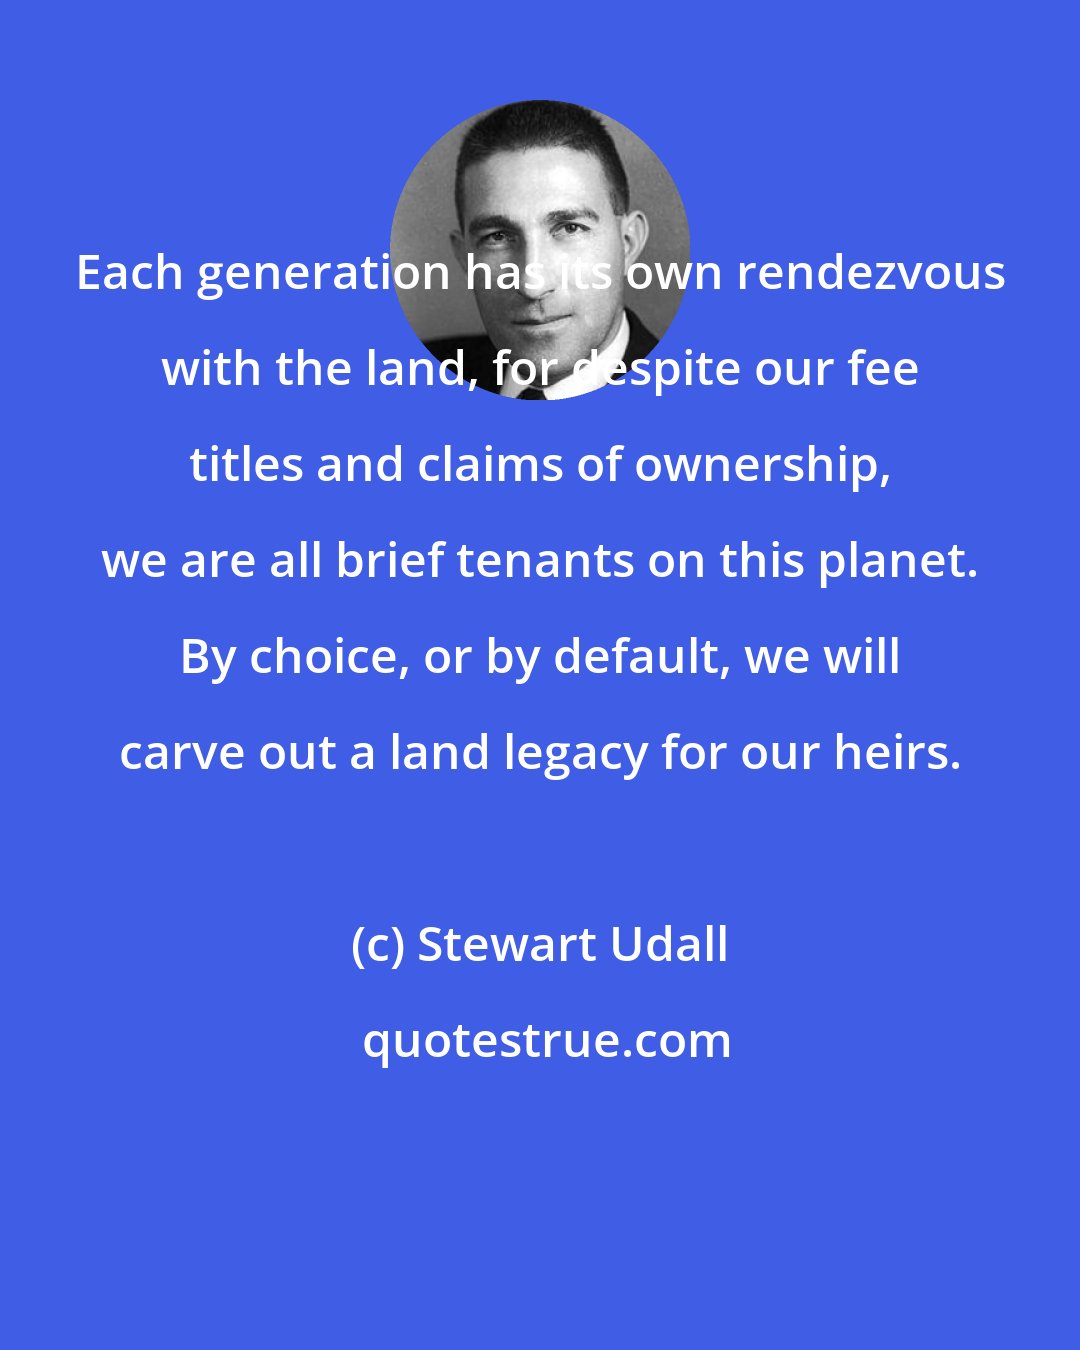 Stewart Udall: Each generation has its own rendezvous with the land, for despite our fee titles and claims of ownership, we are all brief tenants on this planet. By choice, or by default, we will carve out a land legacy for our heirs.